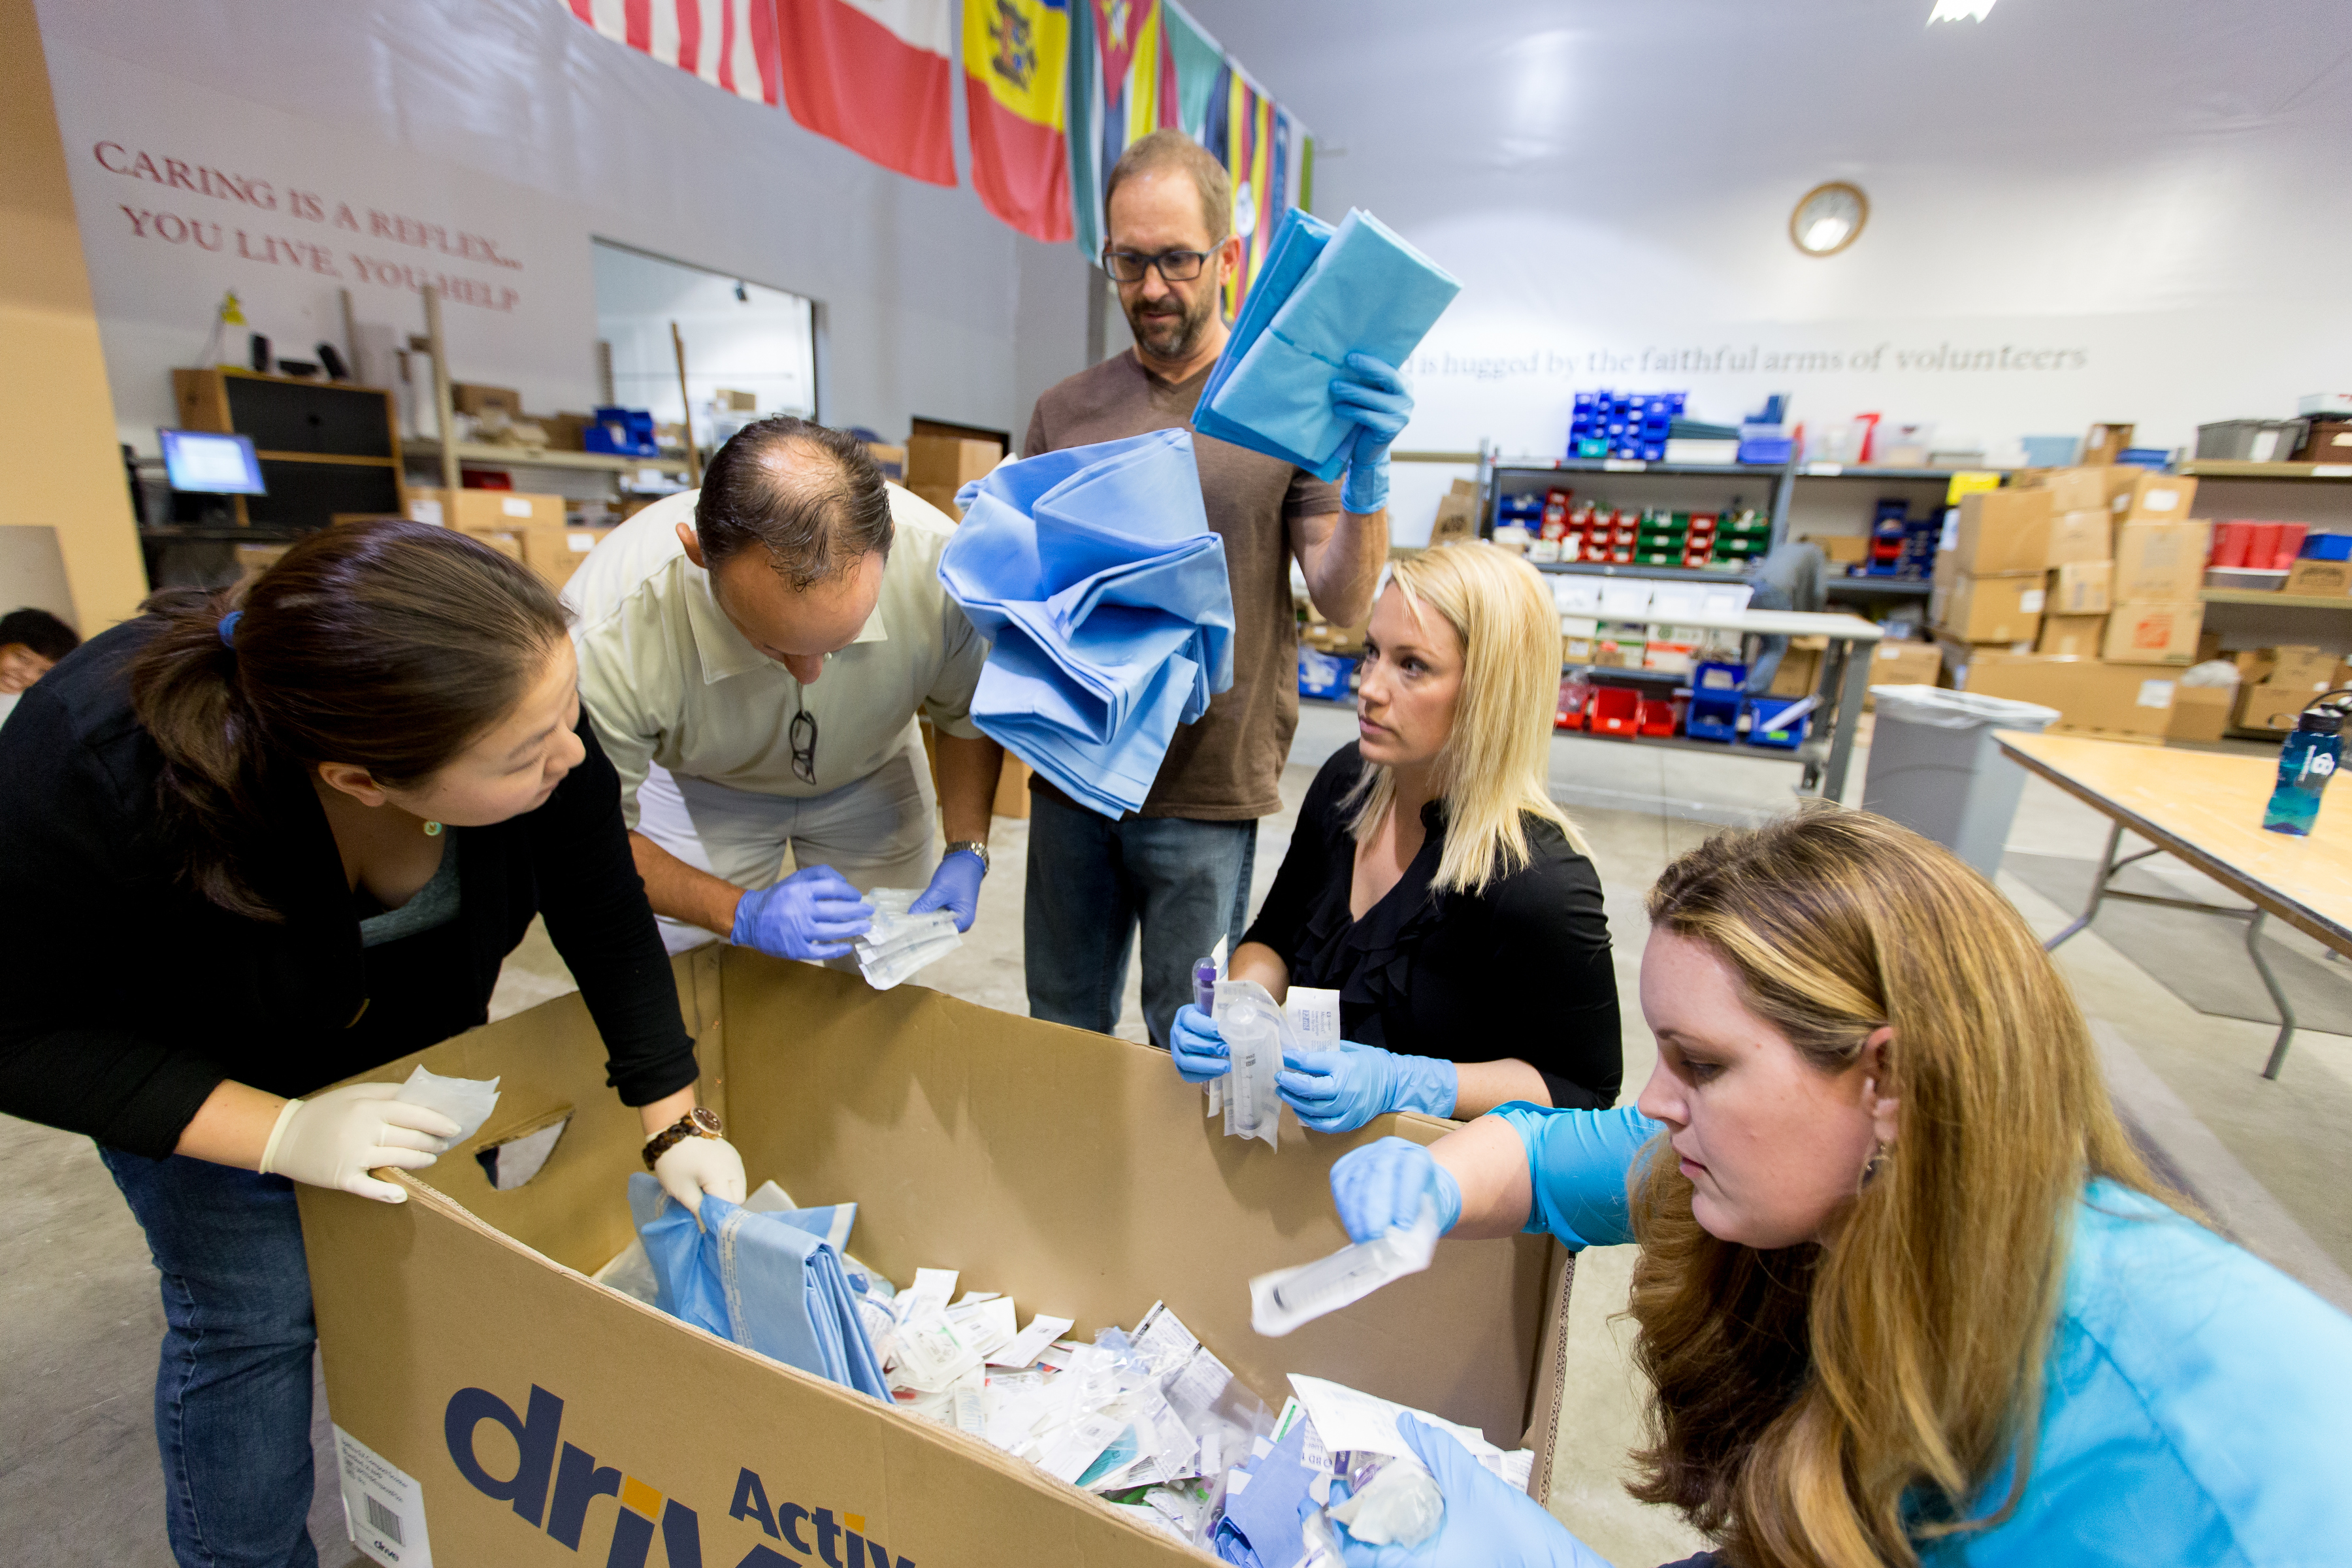 The team begins sorting medical supplies at Medical Teams International. (Photo by Scott Eklund/Red Box Pictures)